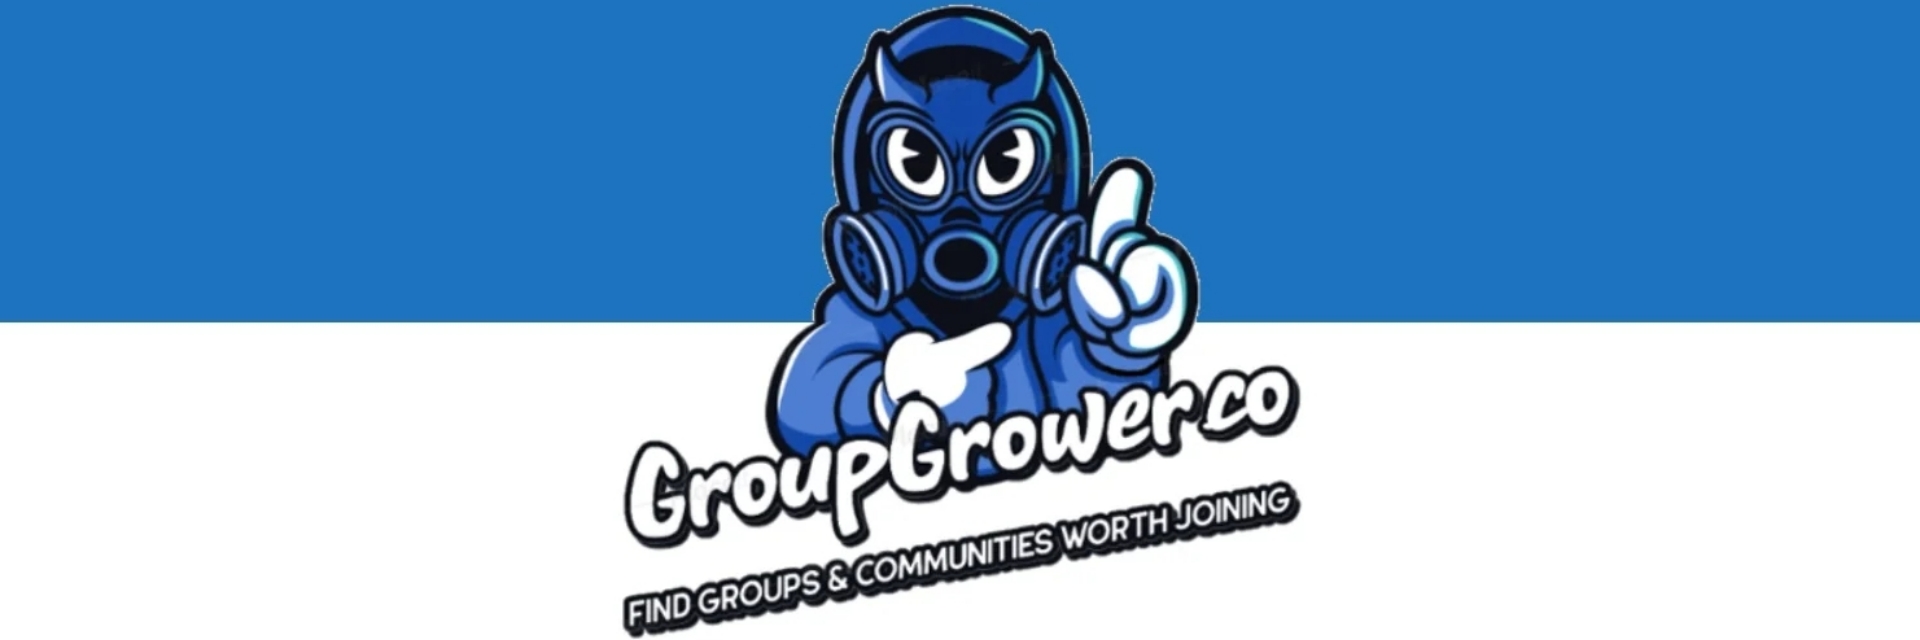 grouppowercopng